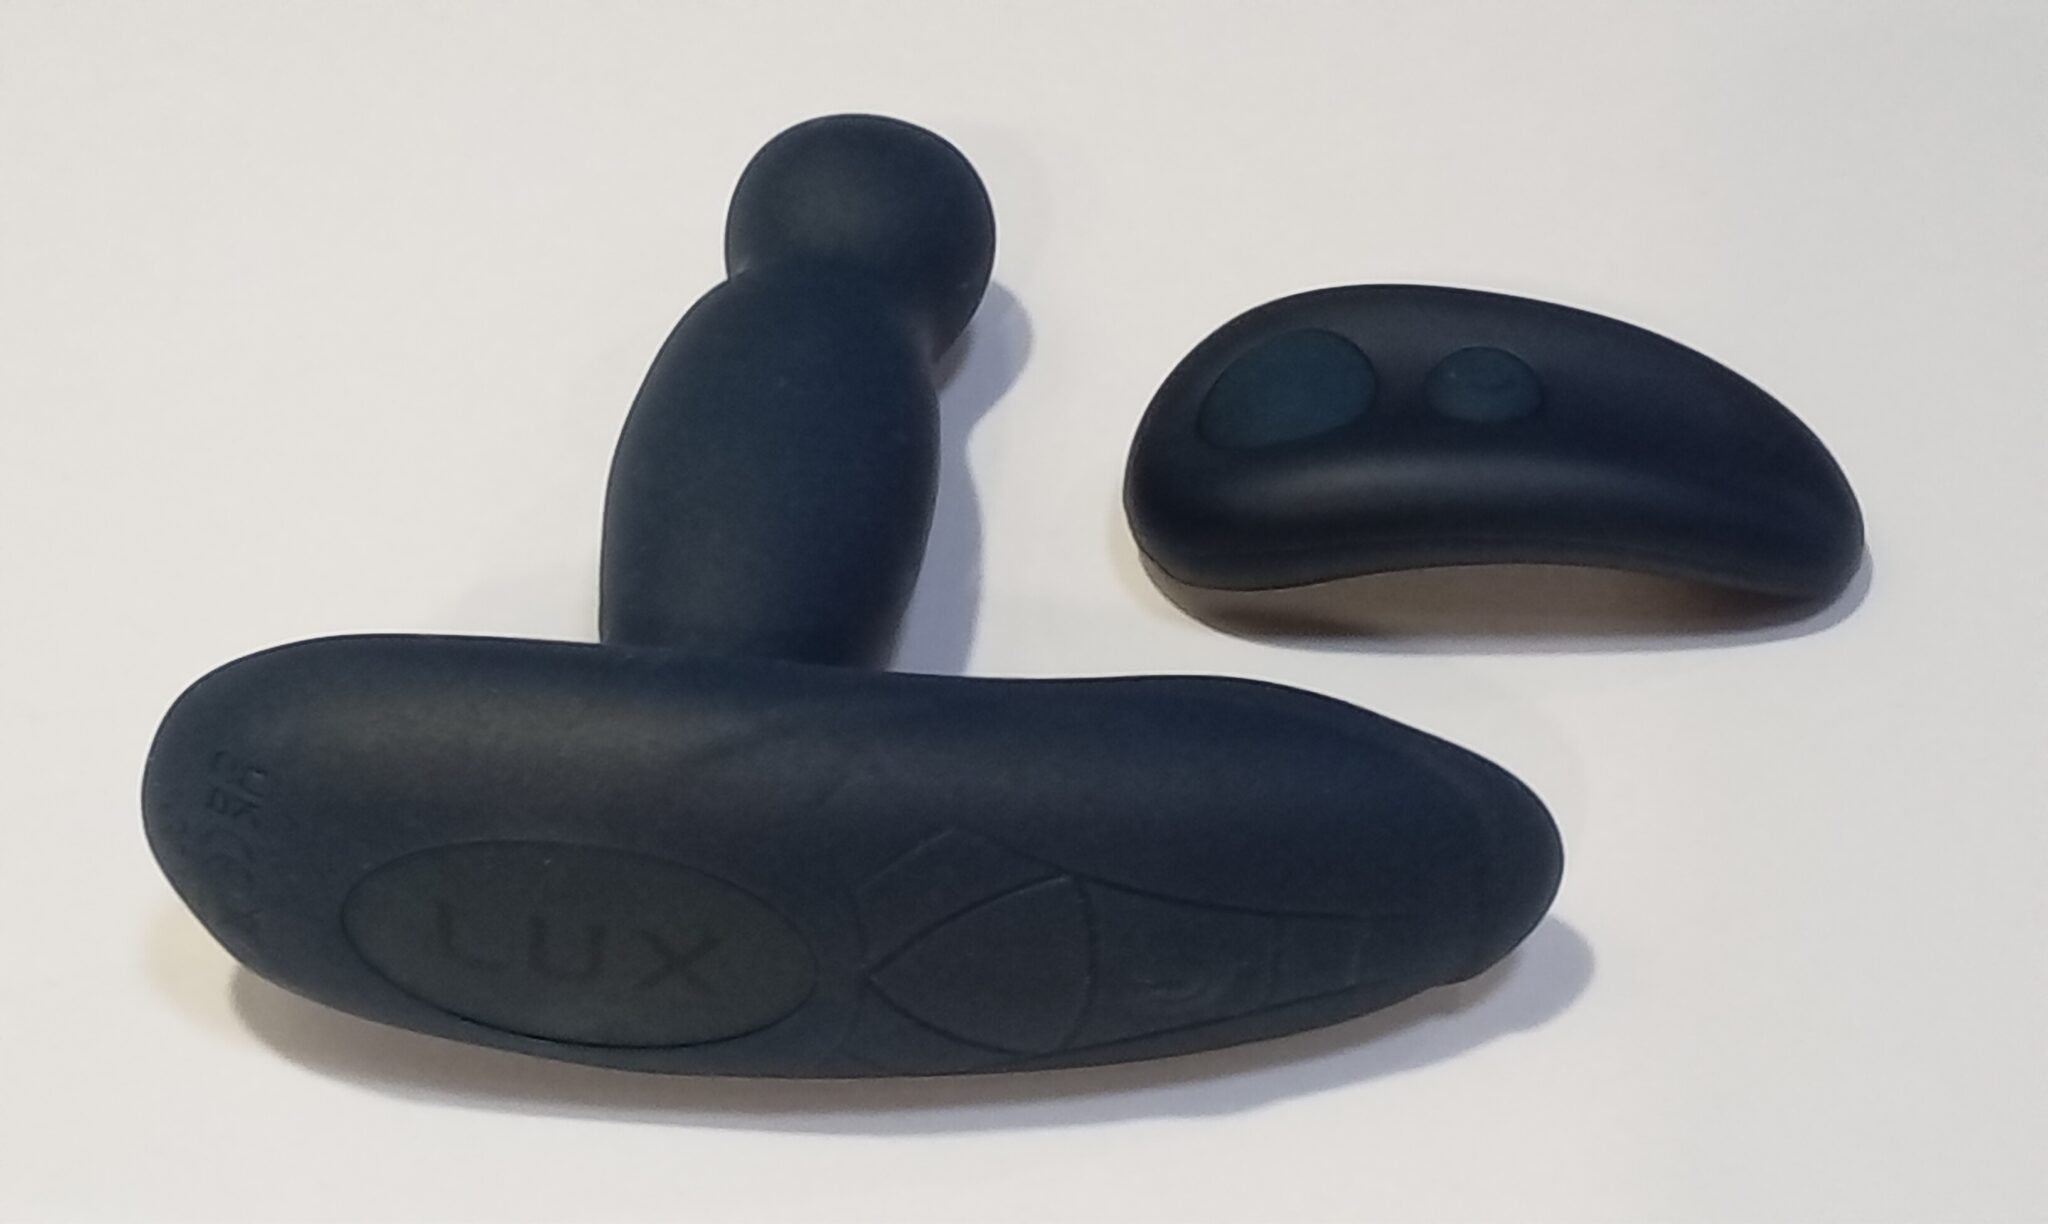 Lux Active Revolve Rotating Prostate Massager  Evaluating the Quality of the Peepshow Toys - LUX ACTIVE REVOLVE